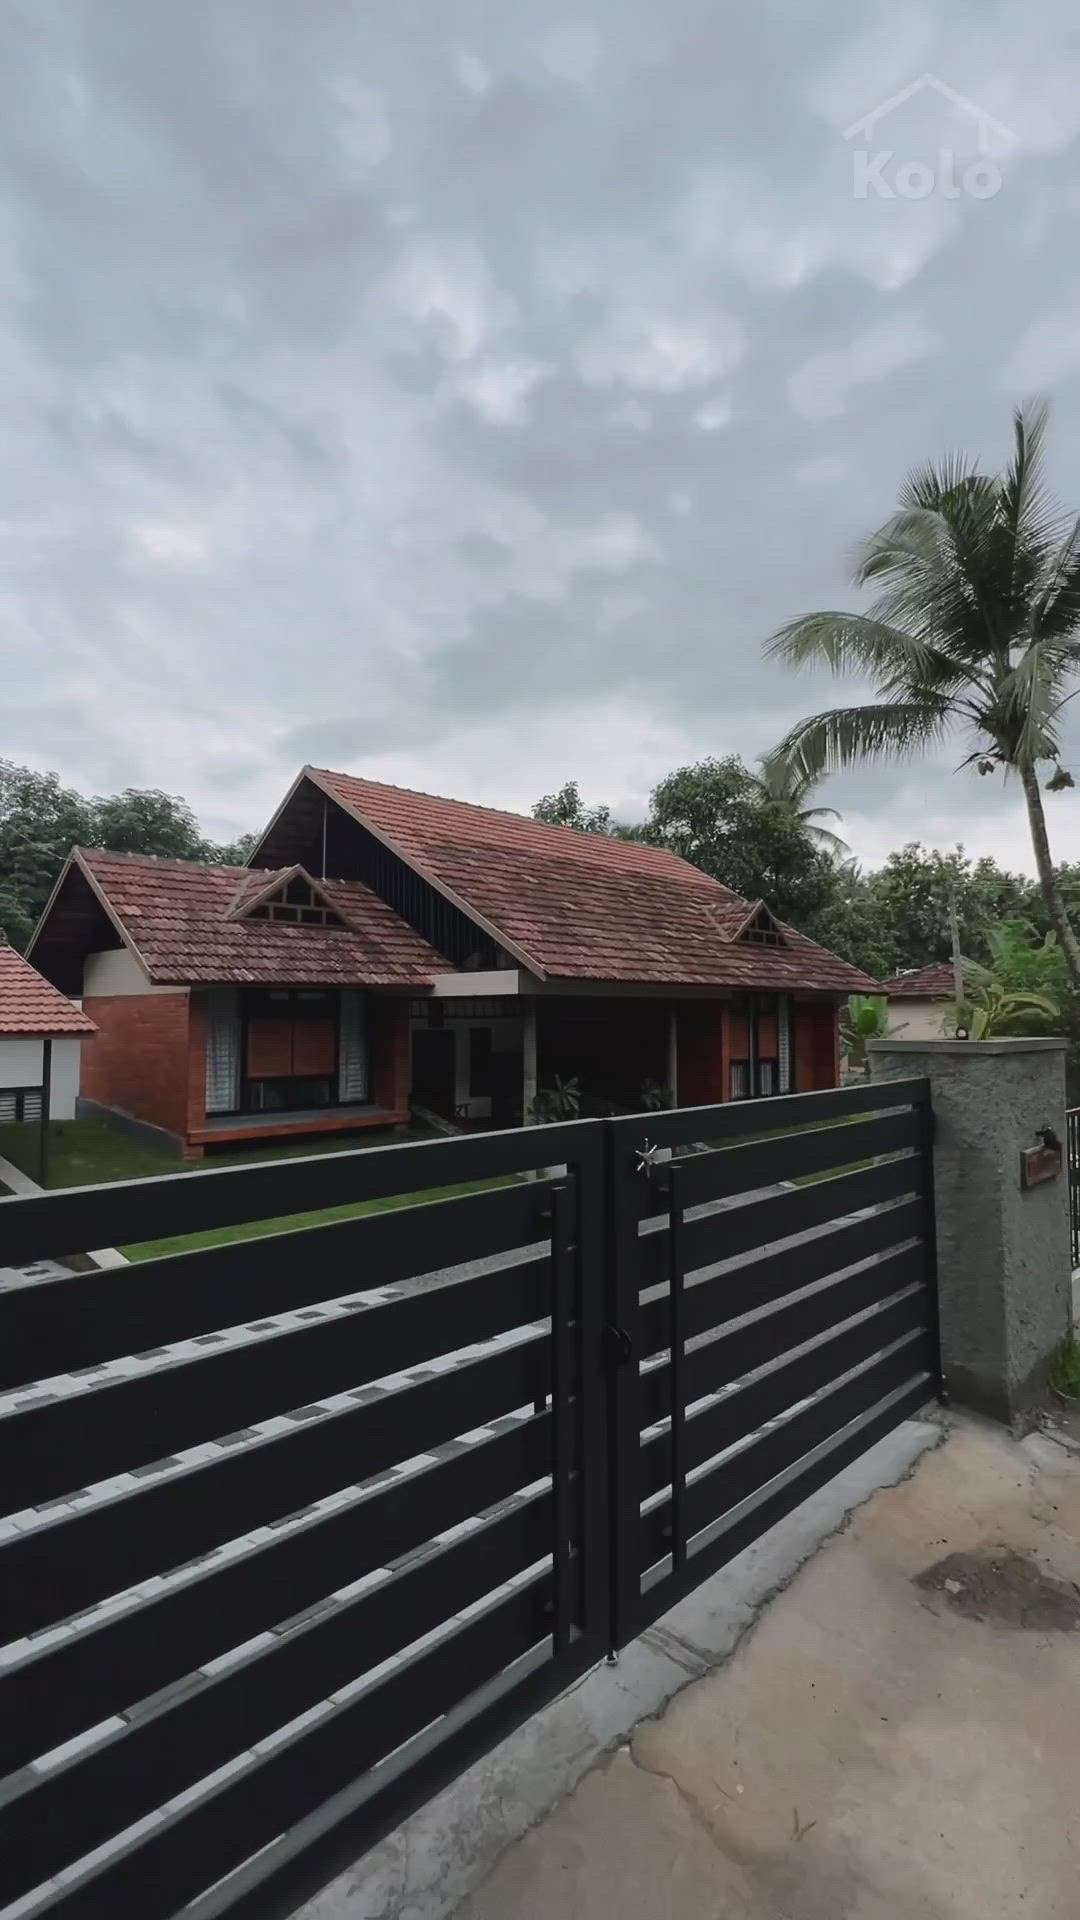 3 Plakkal Residence | 2400 Sqft

Project name : 3 Plakkal Residence
Client : Mr. Joseph and family
Completion year : 2021
Plot Area : 20 cent
Built Area : 2400 sq.ft.
Location : Uthirukulam, Nilambur, Malappuram

Architect              :  @ar.noufalrahman
Engineer              :Shibil shareef
Design Firm        :  @oak.sthiti architects

The planning follows placement of rectangular masses along a grid pattern. Incorporating functions from traditional house model with a modern outlook,

Residence can be described as futuristic in appearance and earthy at its core, incorporating contemporary elements that alludes a timeless charm. With prominence given to reducing any detachment, the design is gravitated towards a grid pattern, planning of spaces.

Kolo - India’s Largest Home Construction Community 🏠

#home #keralahouse #koloapp #keralagram #reelitfeelit #keralagodsowncountry #homedecor #enteveedu #homedesign #keralahomedesignz #keralavibes #instagood #interiordesign #interior #interio